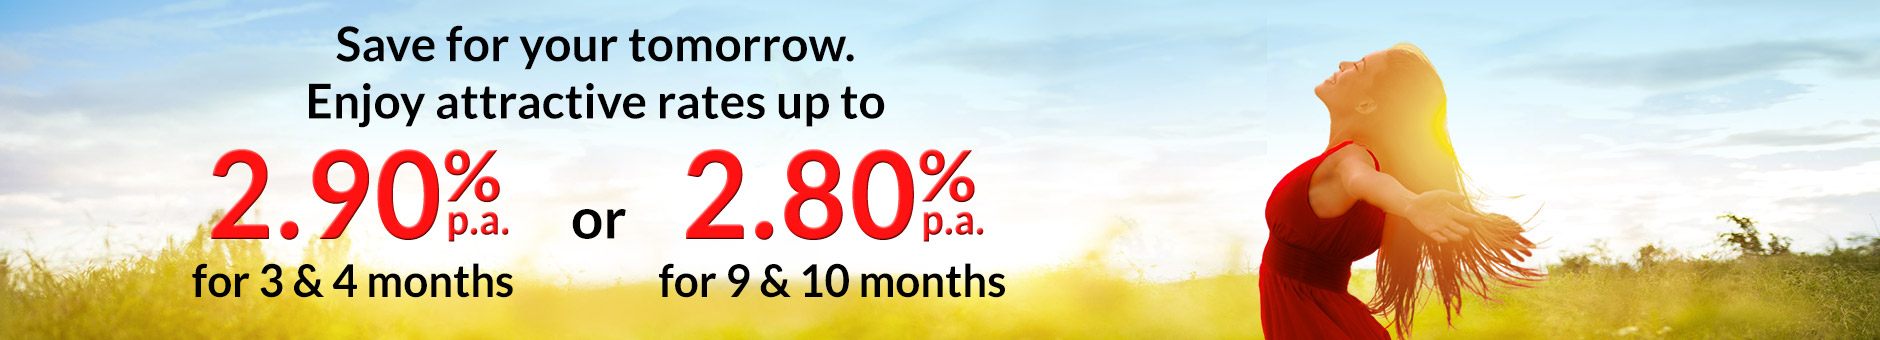 Fixed Deposit Promotion - Save for your tomorrow. Enjoy Attractive Rates up to 2.90% pa for 3 & 4 months and 2.80% pa for 9 & 10 months with minimum deposit of S20,000 and above.